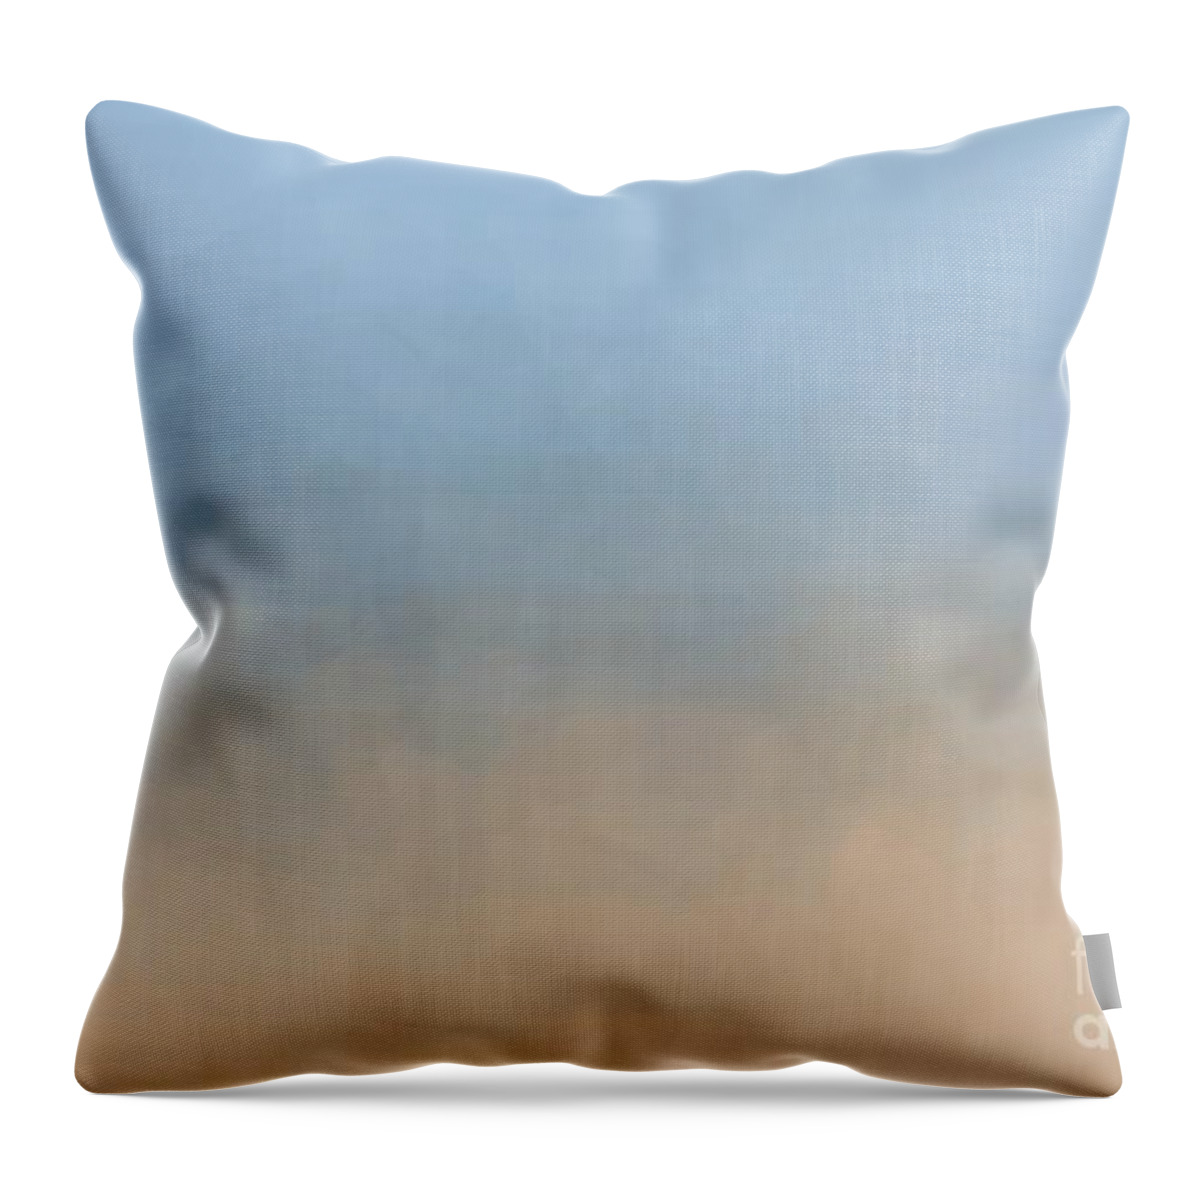 Christian Throw Pillow featuring the photograph The Beach by Anita Oakley